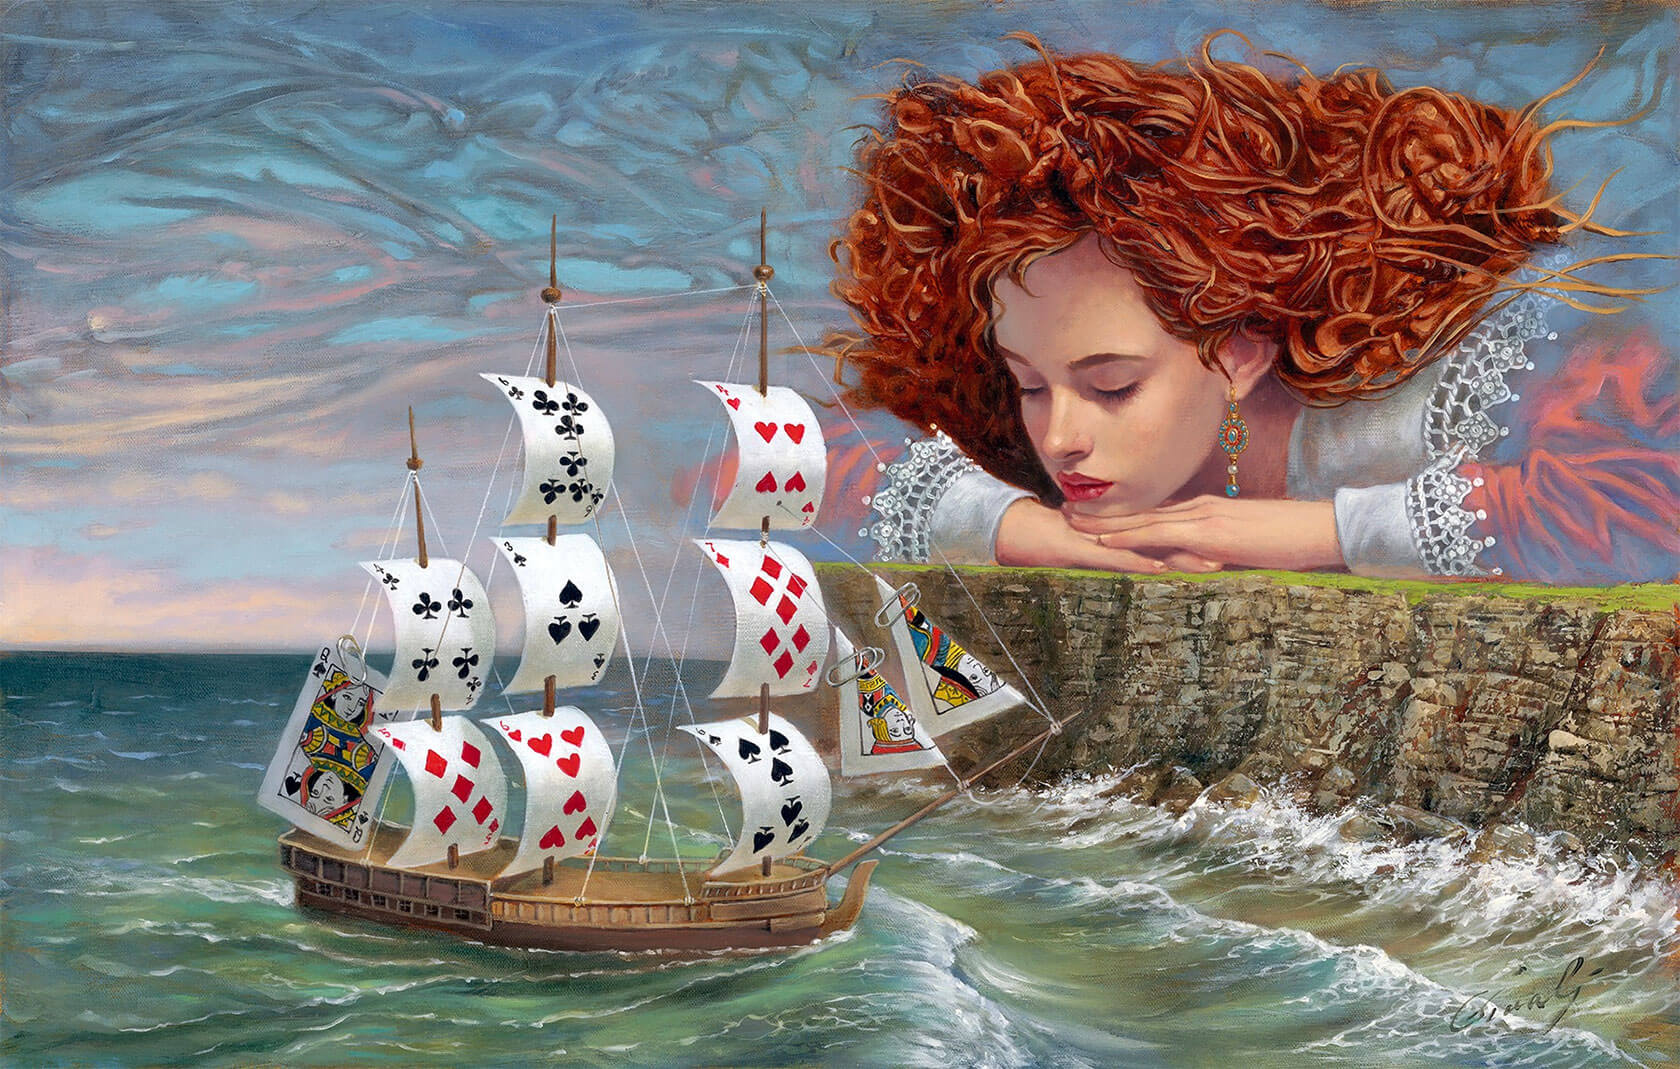 Michael Cheval’s Vibrant Masterpieces Reveal the Hidden Strangeness of Our Existence